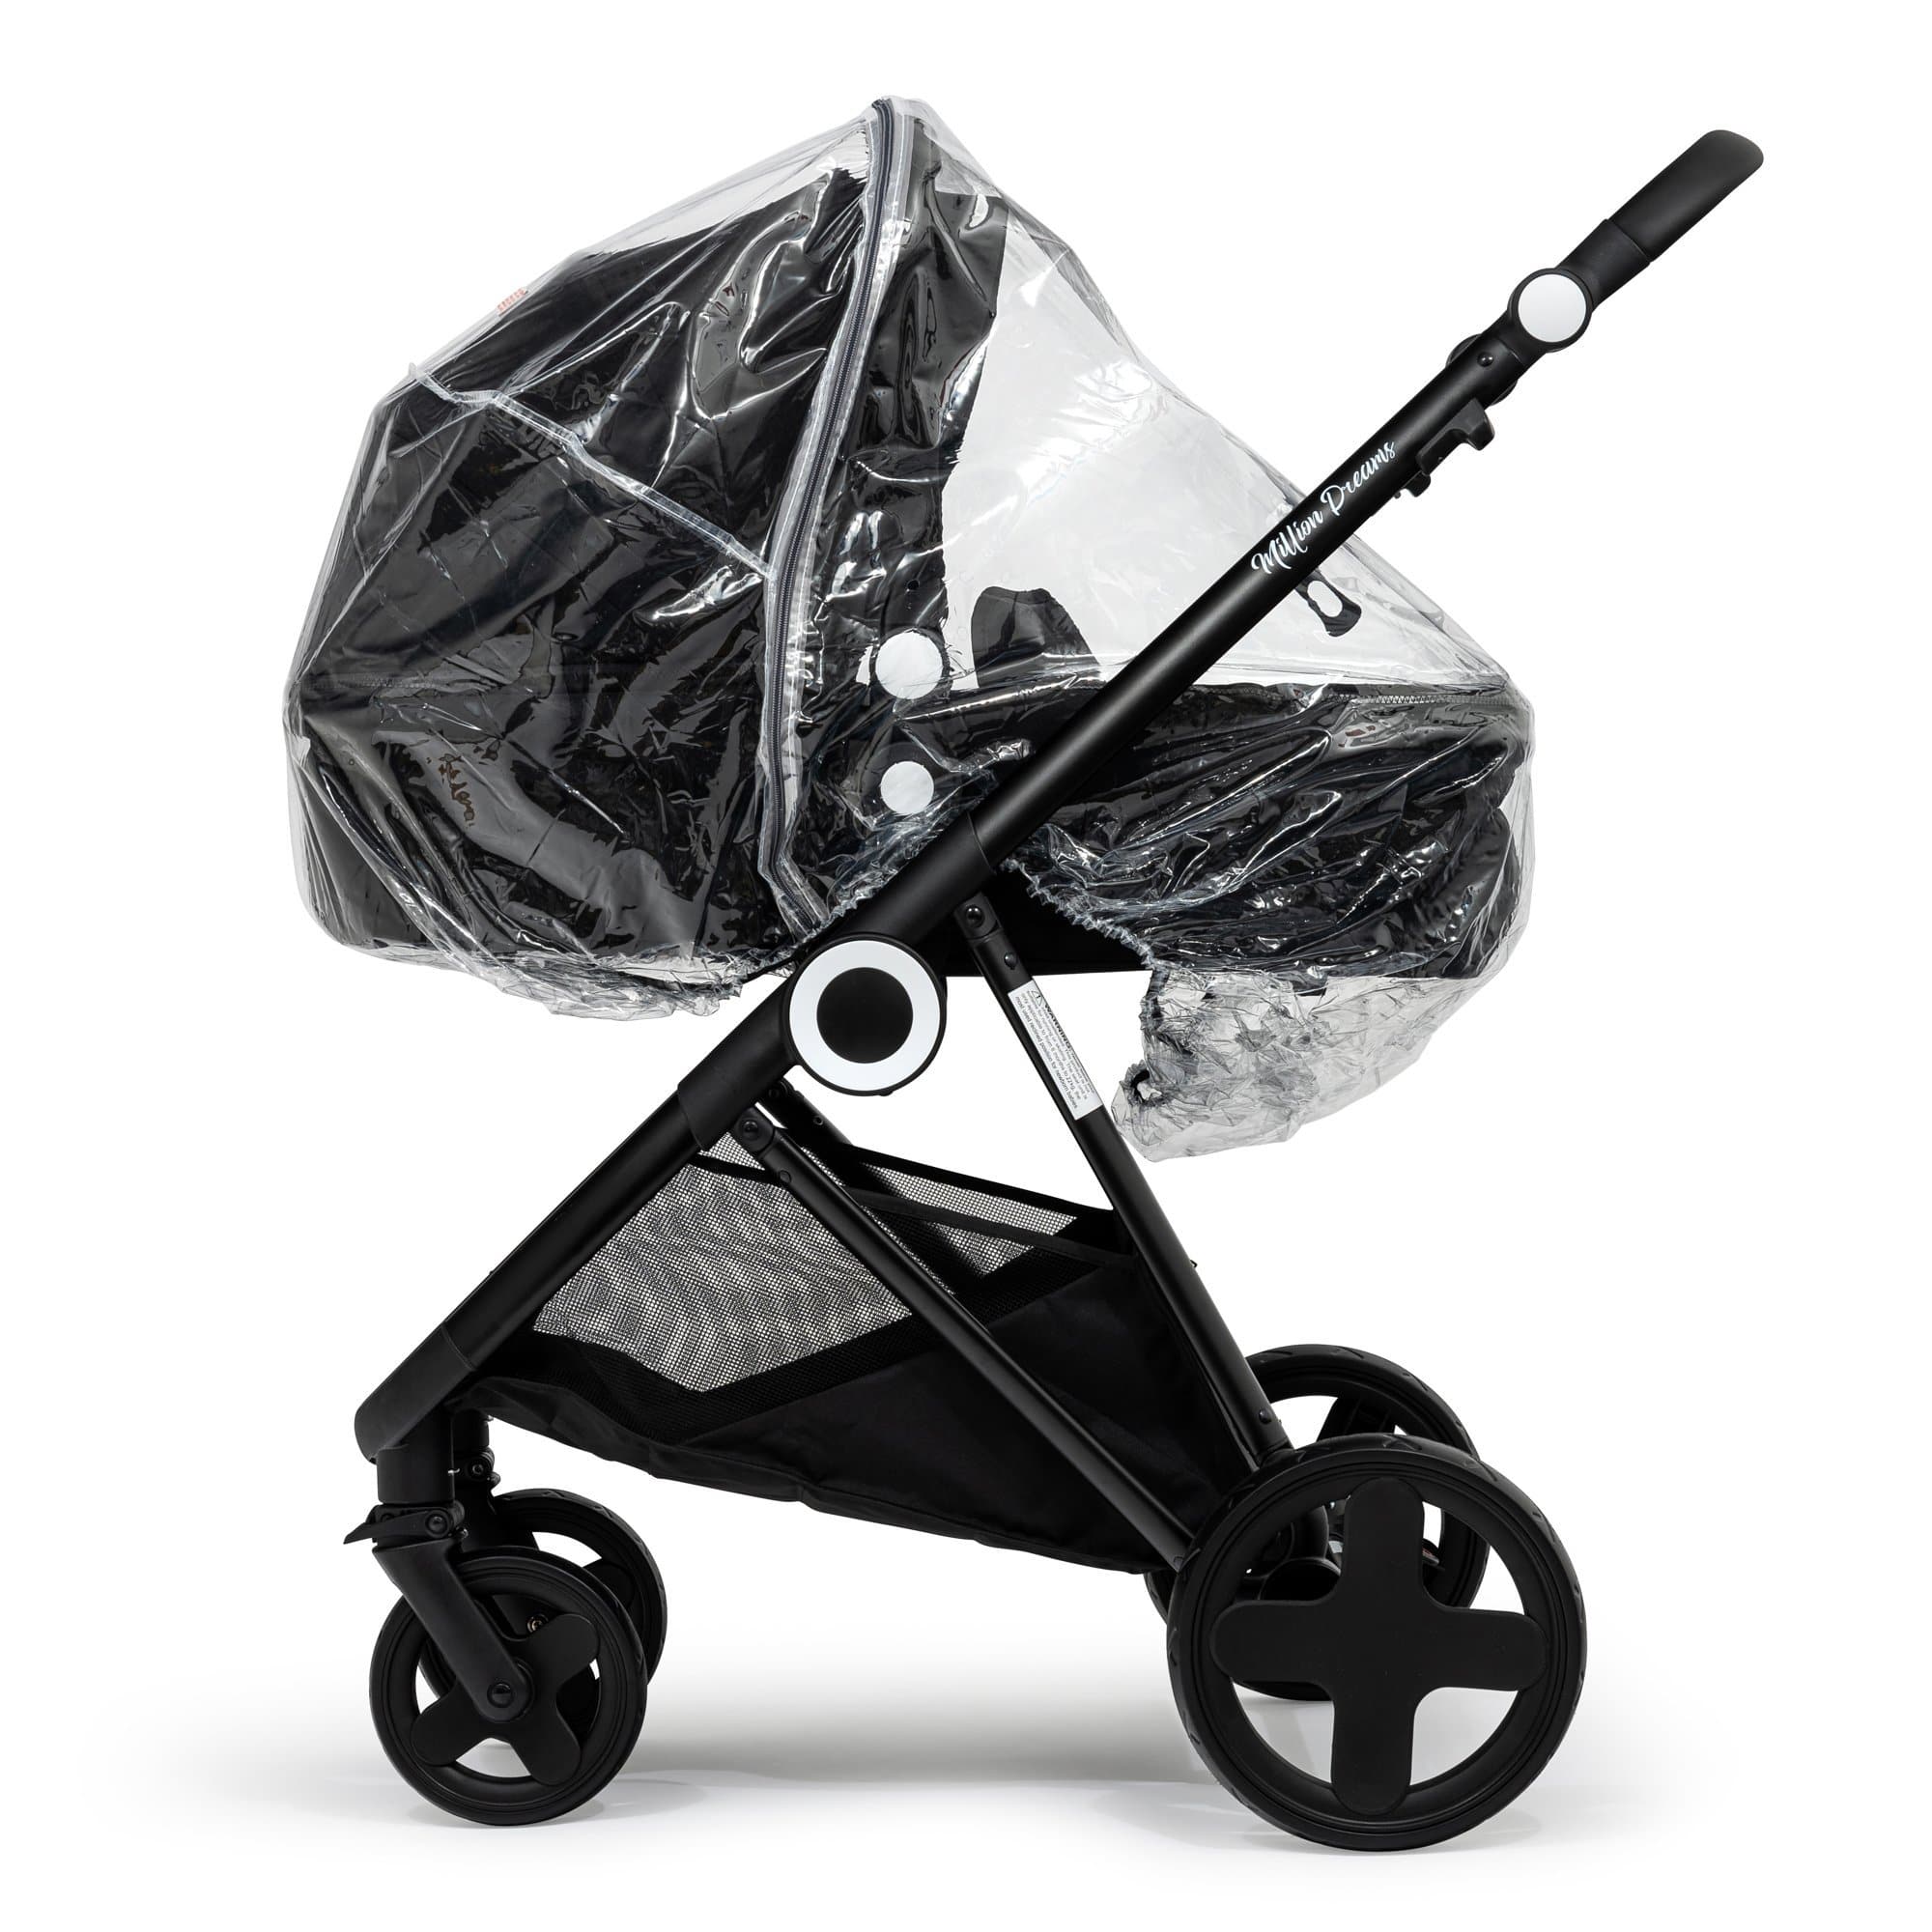 2 in 1 Rain Cover Compatible with Mamas & Papas - Fits All Models - For Your Little One